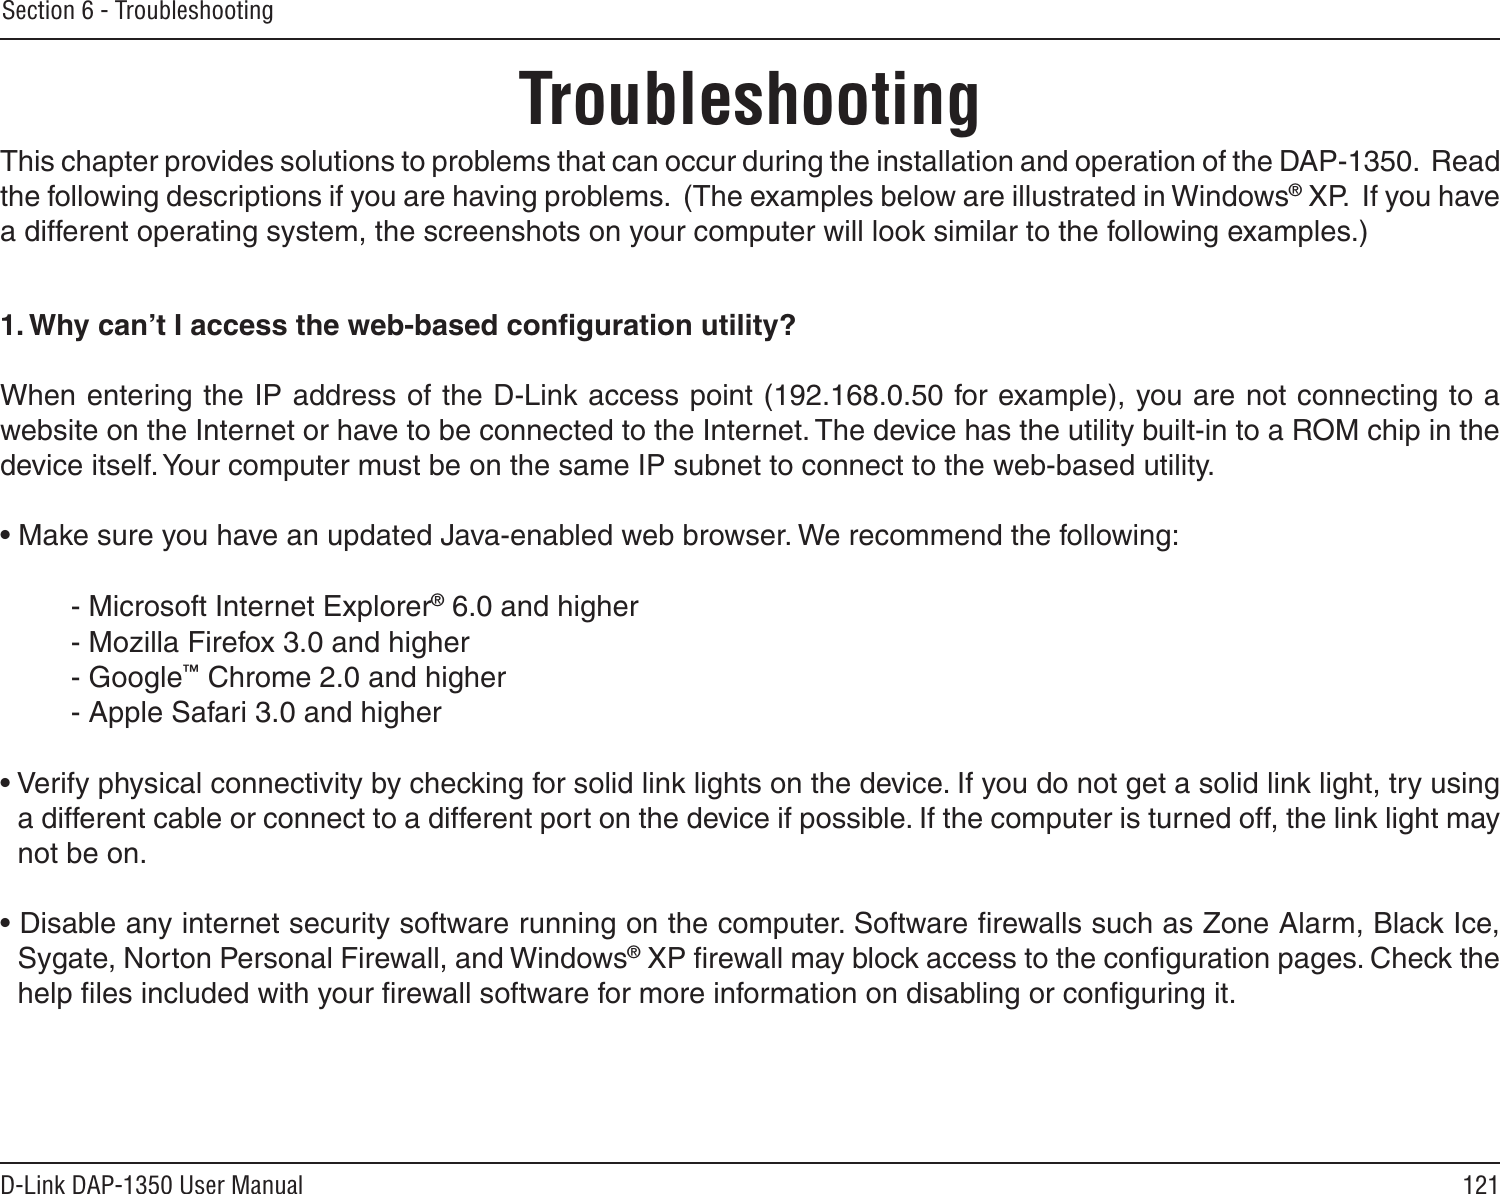 121D-Link DAP-1350 User ManualSection 6 - TroubleshootingTroubleshootingThis chapter provides solutions to problems that can occur during the installation and operation of the DAP-1350.  Read the following descriptions if you are having problems.  (The examples below are illustrated in Windows® XP.  If you have a different operating system, the screenshots on your computer will look similar to the following examples.)1. Why can’t I access the web-based conﬁguration utility?When entering the IP address of the D-Link access point (192.168.0.50 for example), you are not connecting to a website on the Internet or have to be connected to the Internet. The device has the utility built-in to a ROM chip in the device itself. Your computer must be on the same IP subnet to connect to the web-based utility. • Make sure you have an updated Java-enabled web browser. We recommend the following: - Microsoft Internet Explorer® 6.0 and higher- Mozilla Firefox 3.0 and higher- Google™ Chrome 2.0 and higher- Apple Safari 3.0 and higher• Verify physical connectivity by checking for solid link lights on the device. If you do not get a solid link light, try using a different cable or connect to a different port on the device if possible. If the computer is turned off, the link light may not be on.• Disable any internet security software running on the computer. Software ﬁrewalls such as Zone Alarm, Black Ice, Sygate, Norton Personal Firewall, and Windows® XP ﬁrewall may block access to the conﬁguration pages. Check the help ﬁles included with your ﬁrewall software for more information on disabling or conﬁguring it.